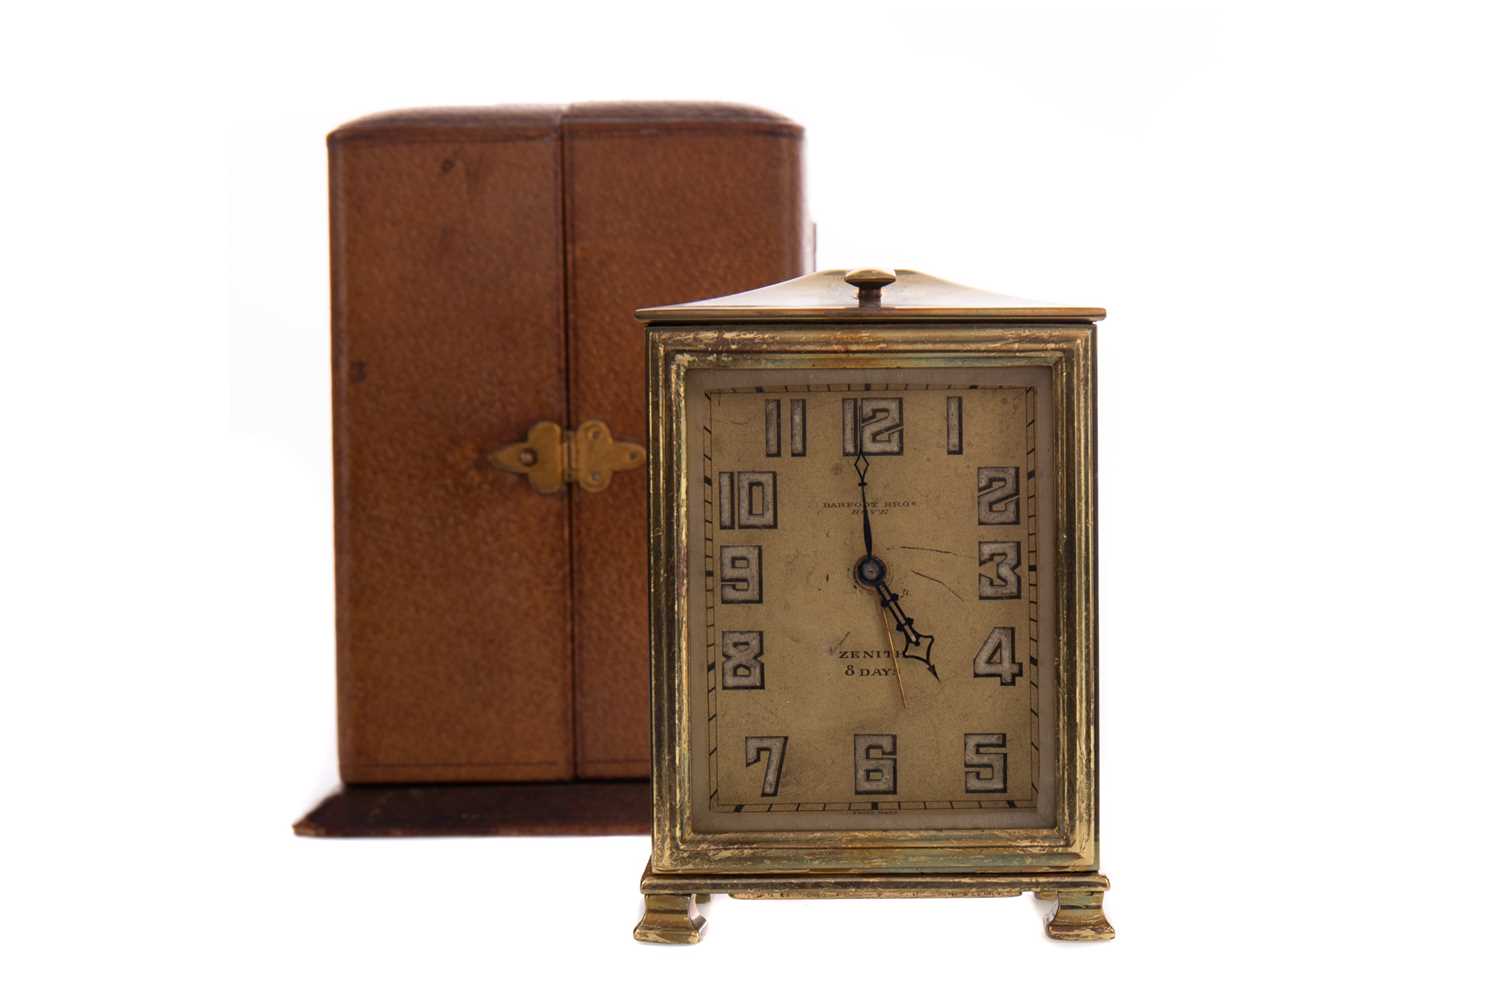 Lot 1135 - AN EARLY 20TH CENTURY ZENITH BEDSIDE TIMEPIECE